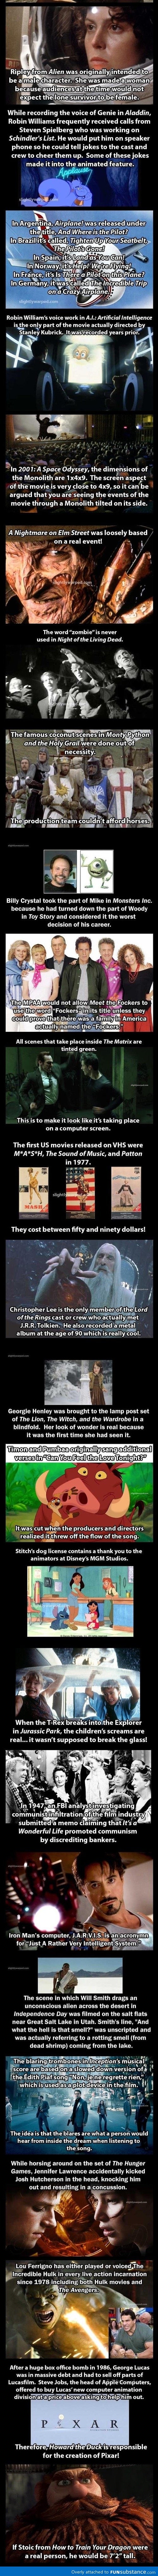 Interesting Movie Facts